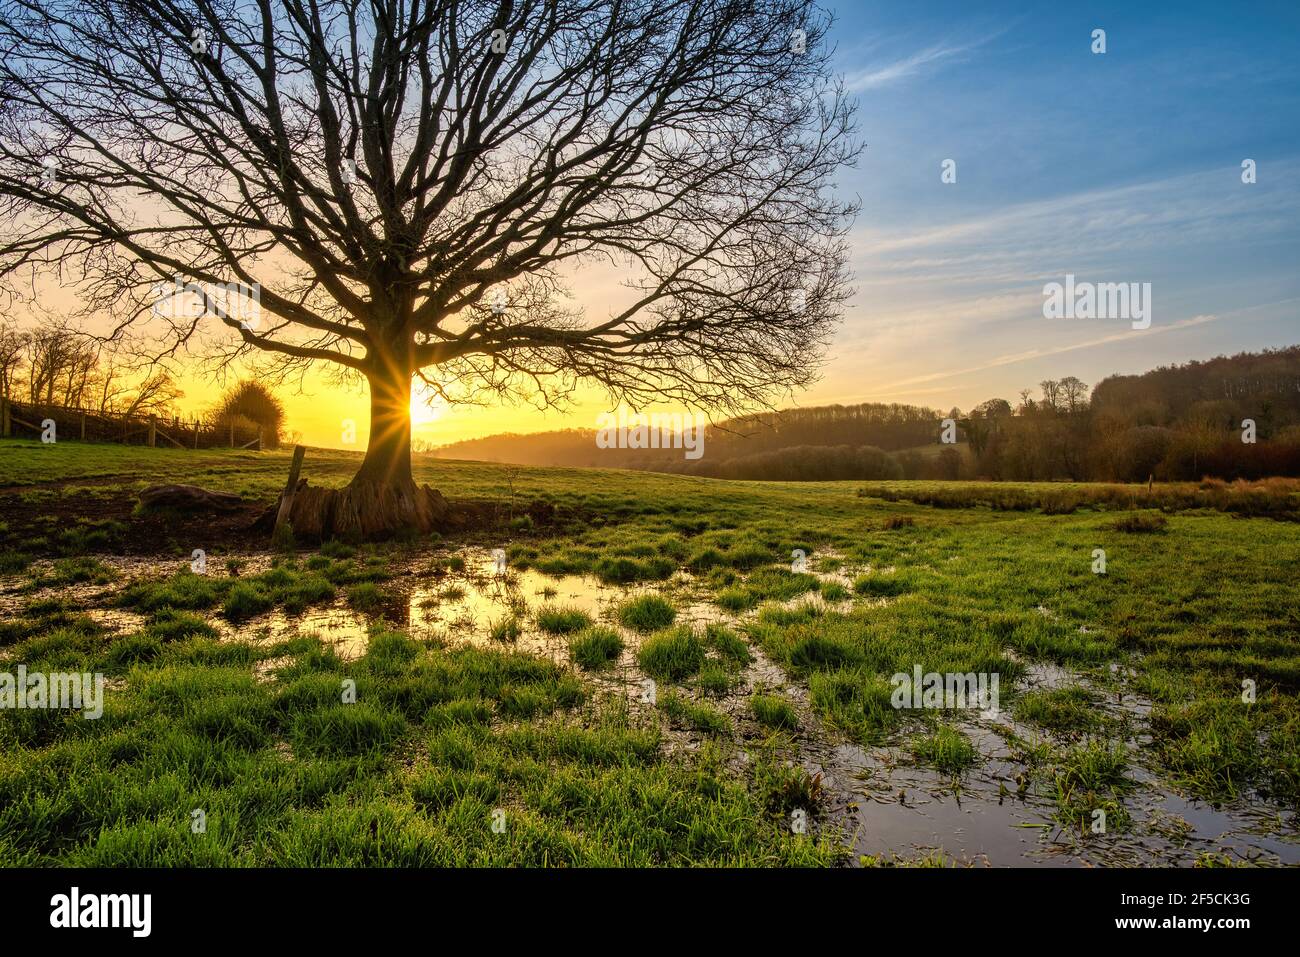 Sunrise over flooded field in River Chess Valley, Latimer near Chesham, The Chilterns AONB, England Stock Photo